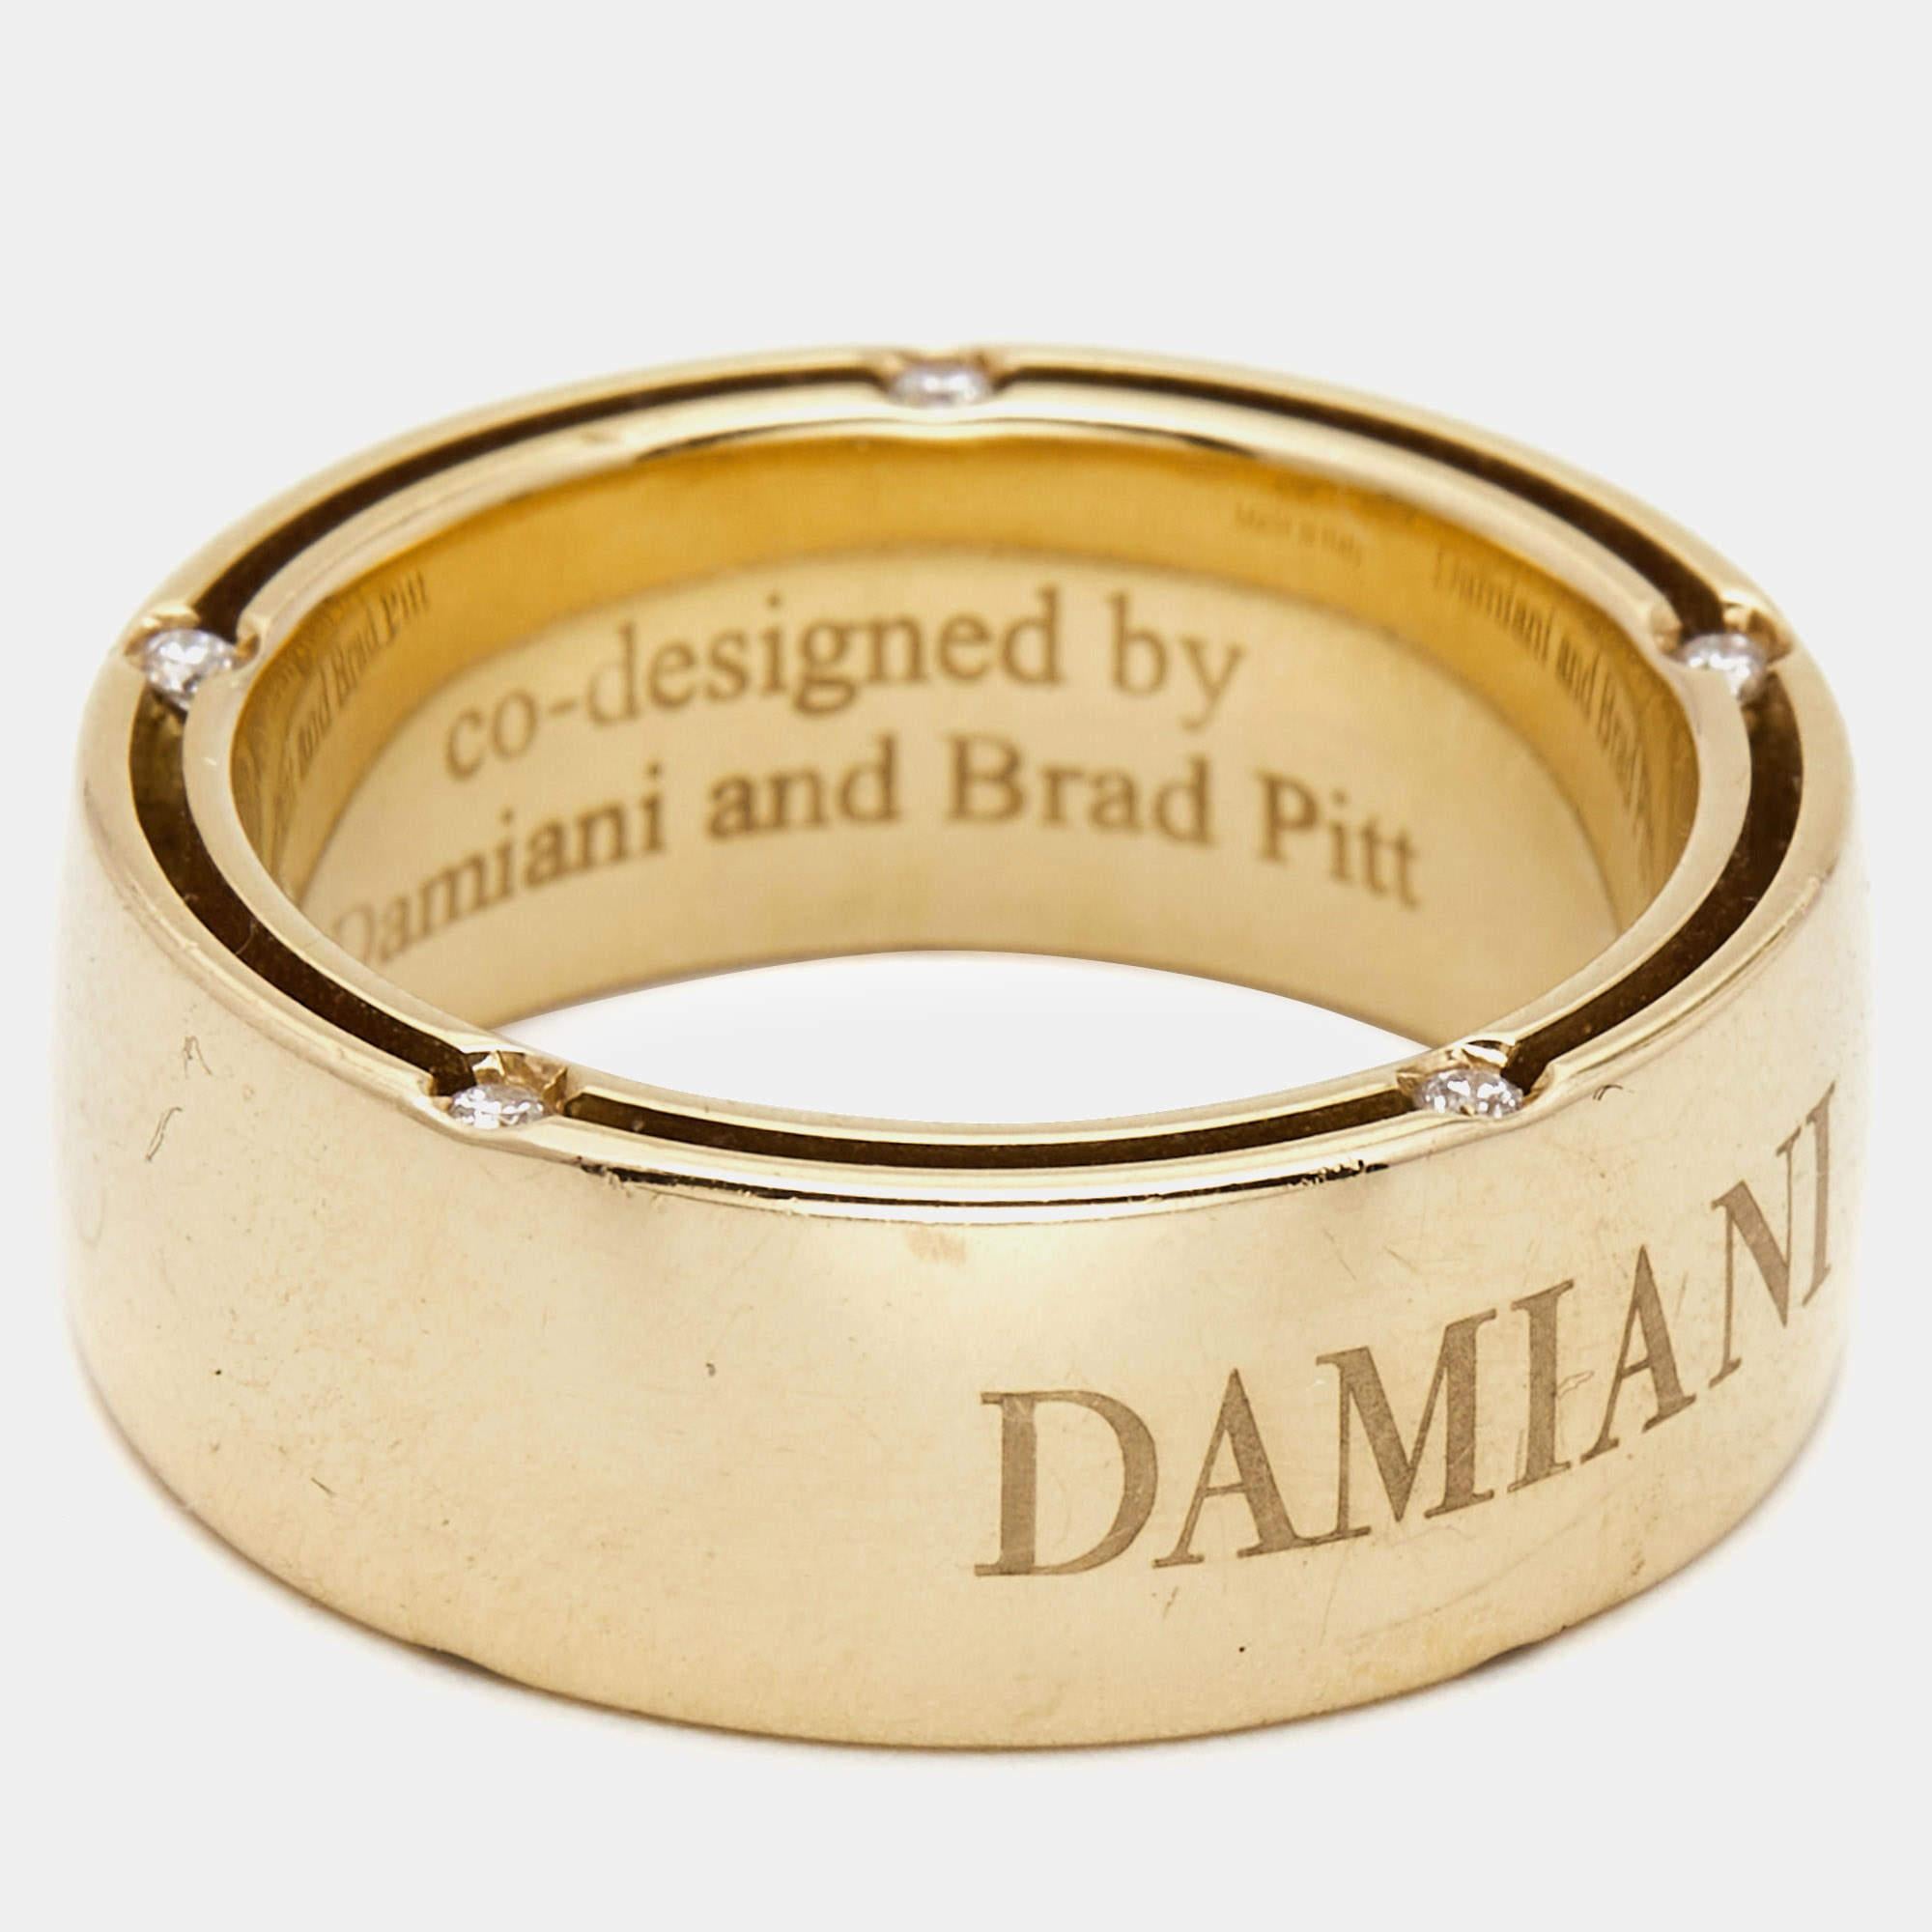 Damiani brings you this magnificent ring that reflects luxury and beauty. It has been co-created by Damiani and Hollywood actor Brad Pitt. Splendidly crafted from 18k yellow gold in a sleek band, the piece is engraved with the brand name and set